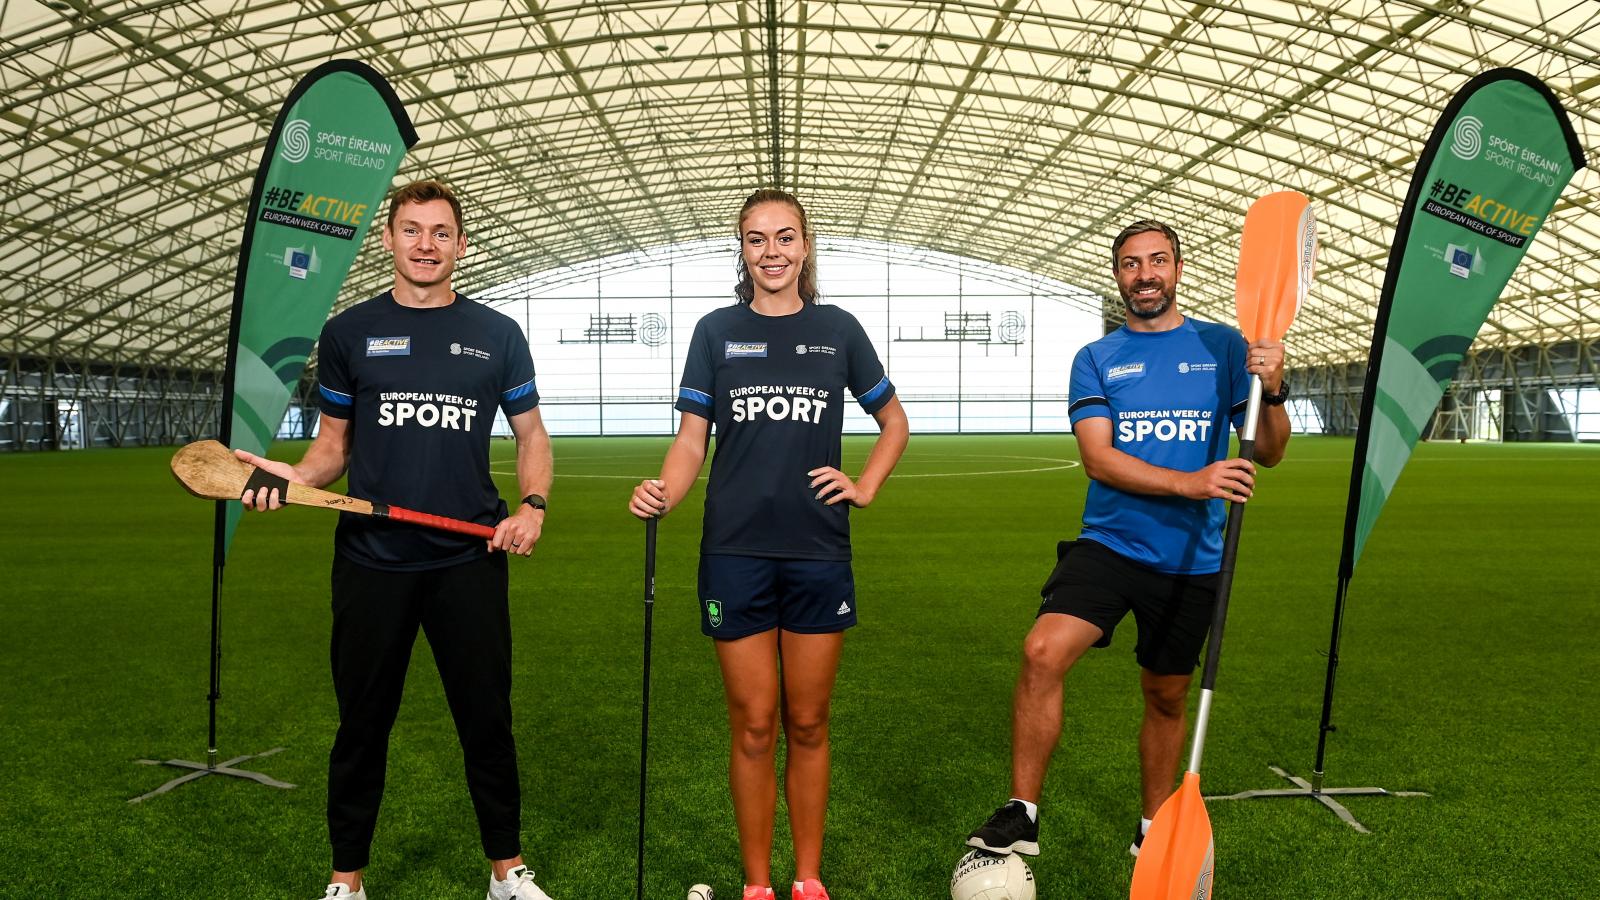 David Gillick, Eimear Lambe, Kenneth Egan pose in an indoor football pitch holding various sports equipment